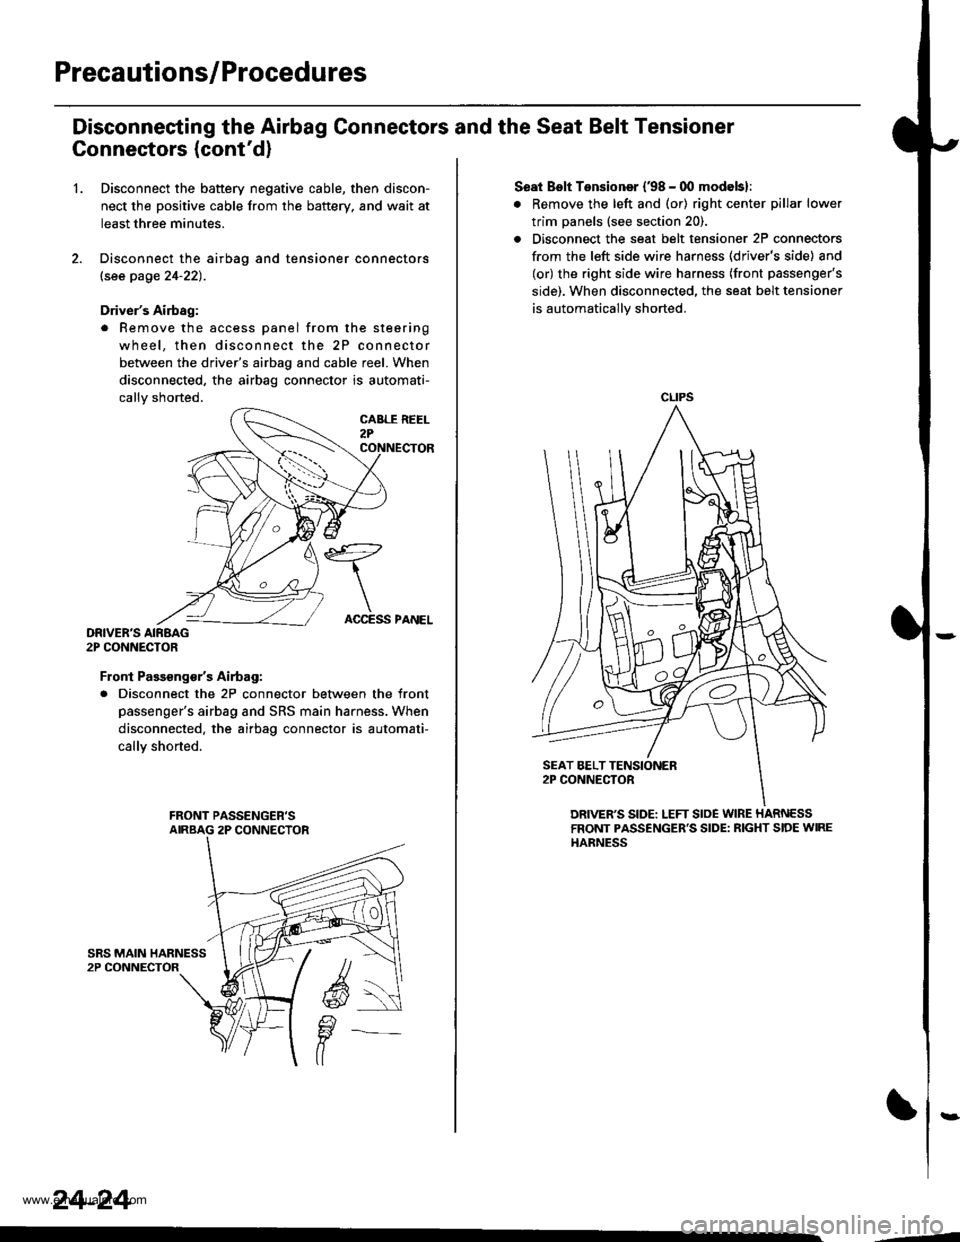 HONDA CR-V 2000 RD1-RD3 / 1.G Owners Manual 
Precautions/Procedures
Disconneeting the Airbag Connectors and the Seat Belt Tensioner
Connectors (contd)
1.Disconnect the battery negative cable, then discon-
nect the positive cable from the batte